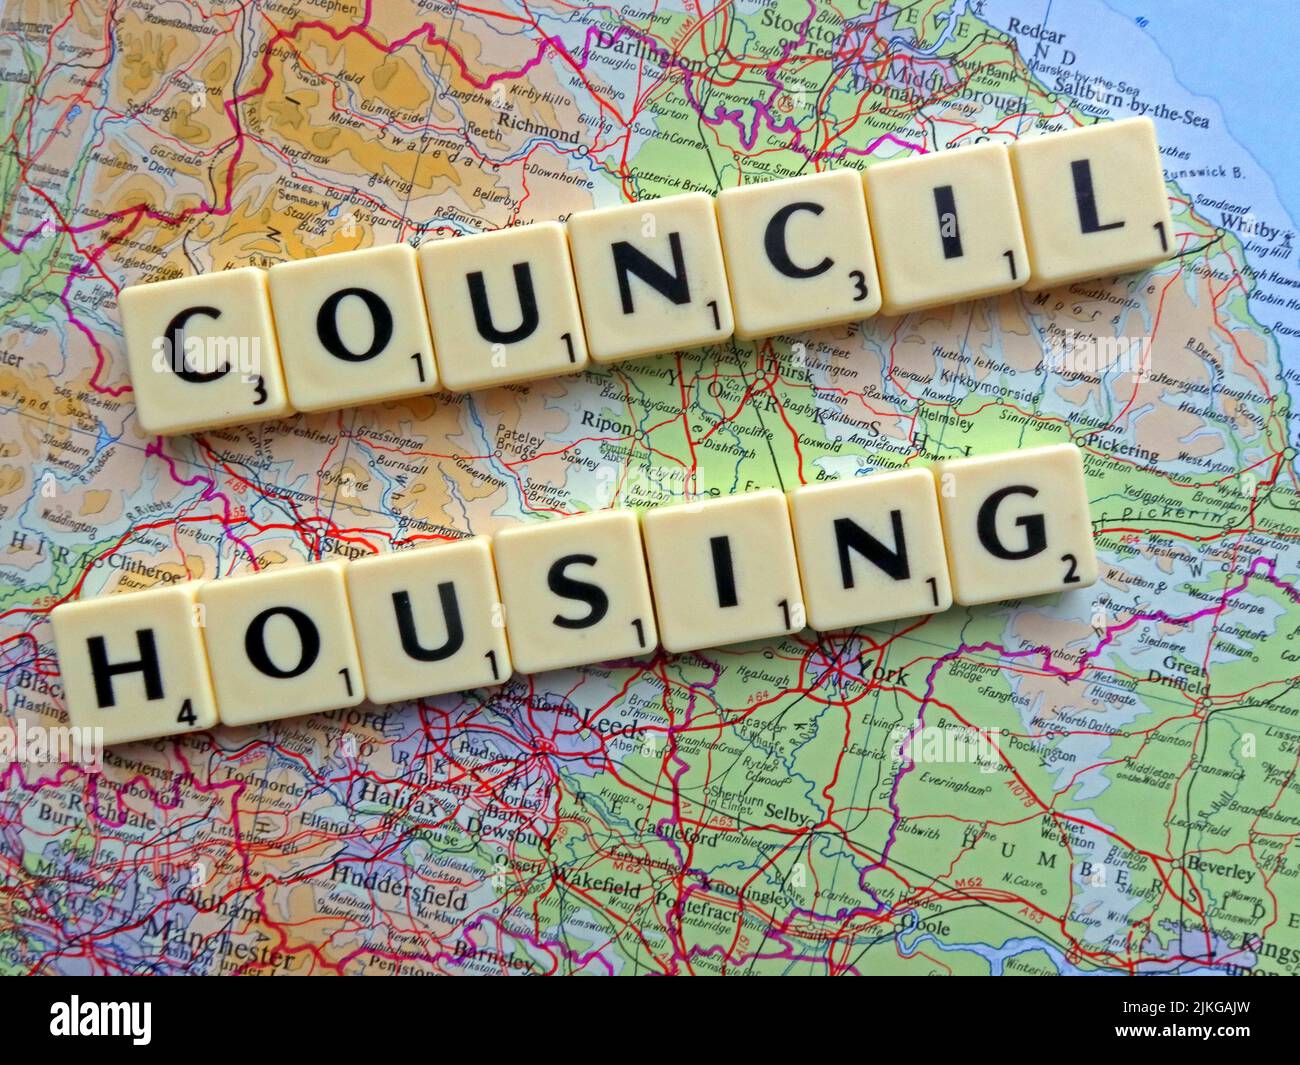 Council Housing spelled out in Scrabble letters on a map of England Stock Photo